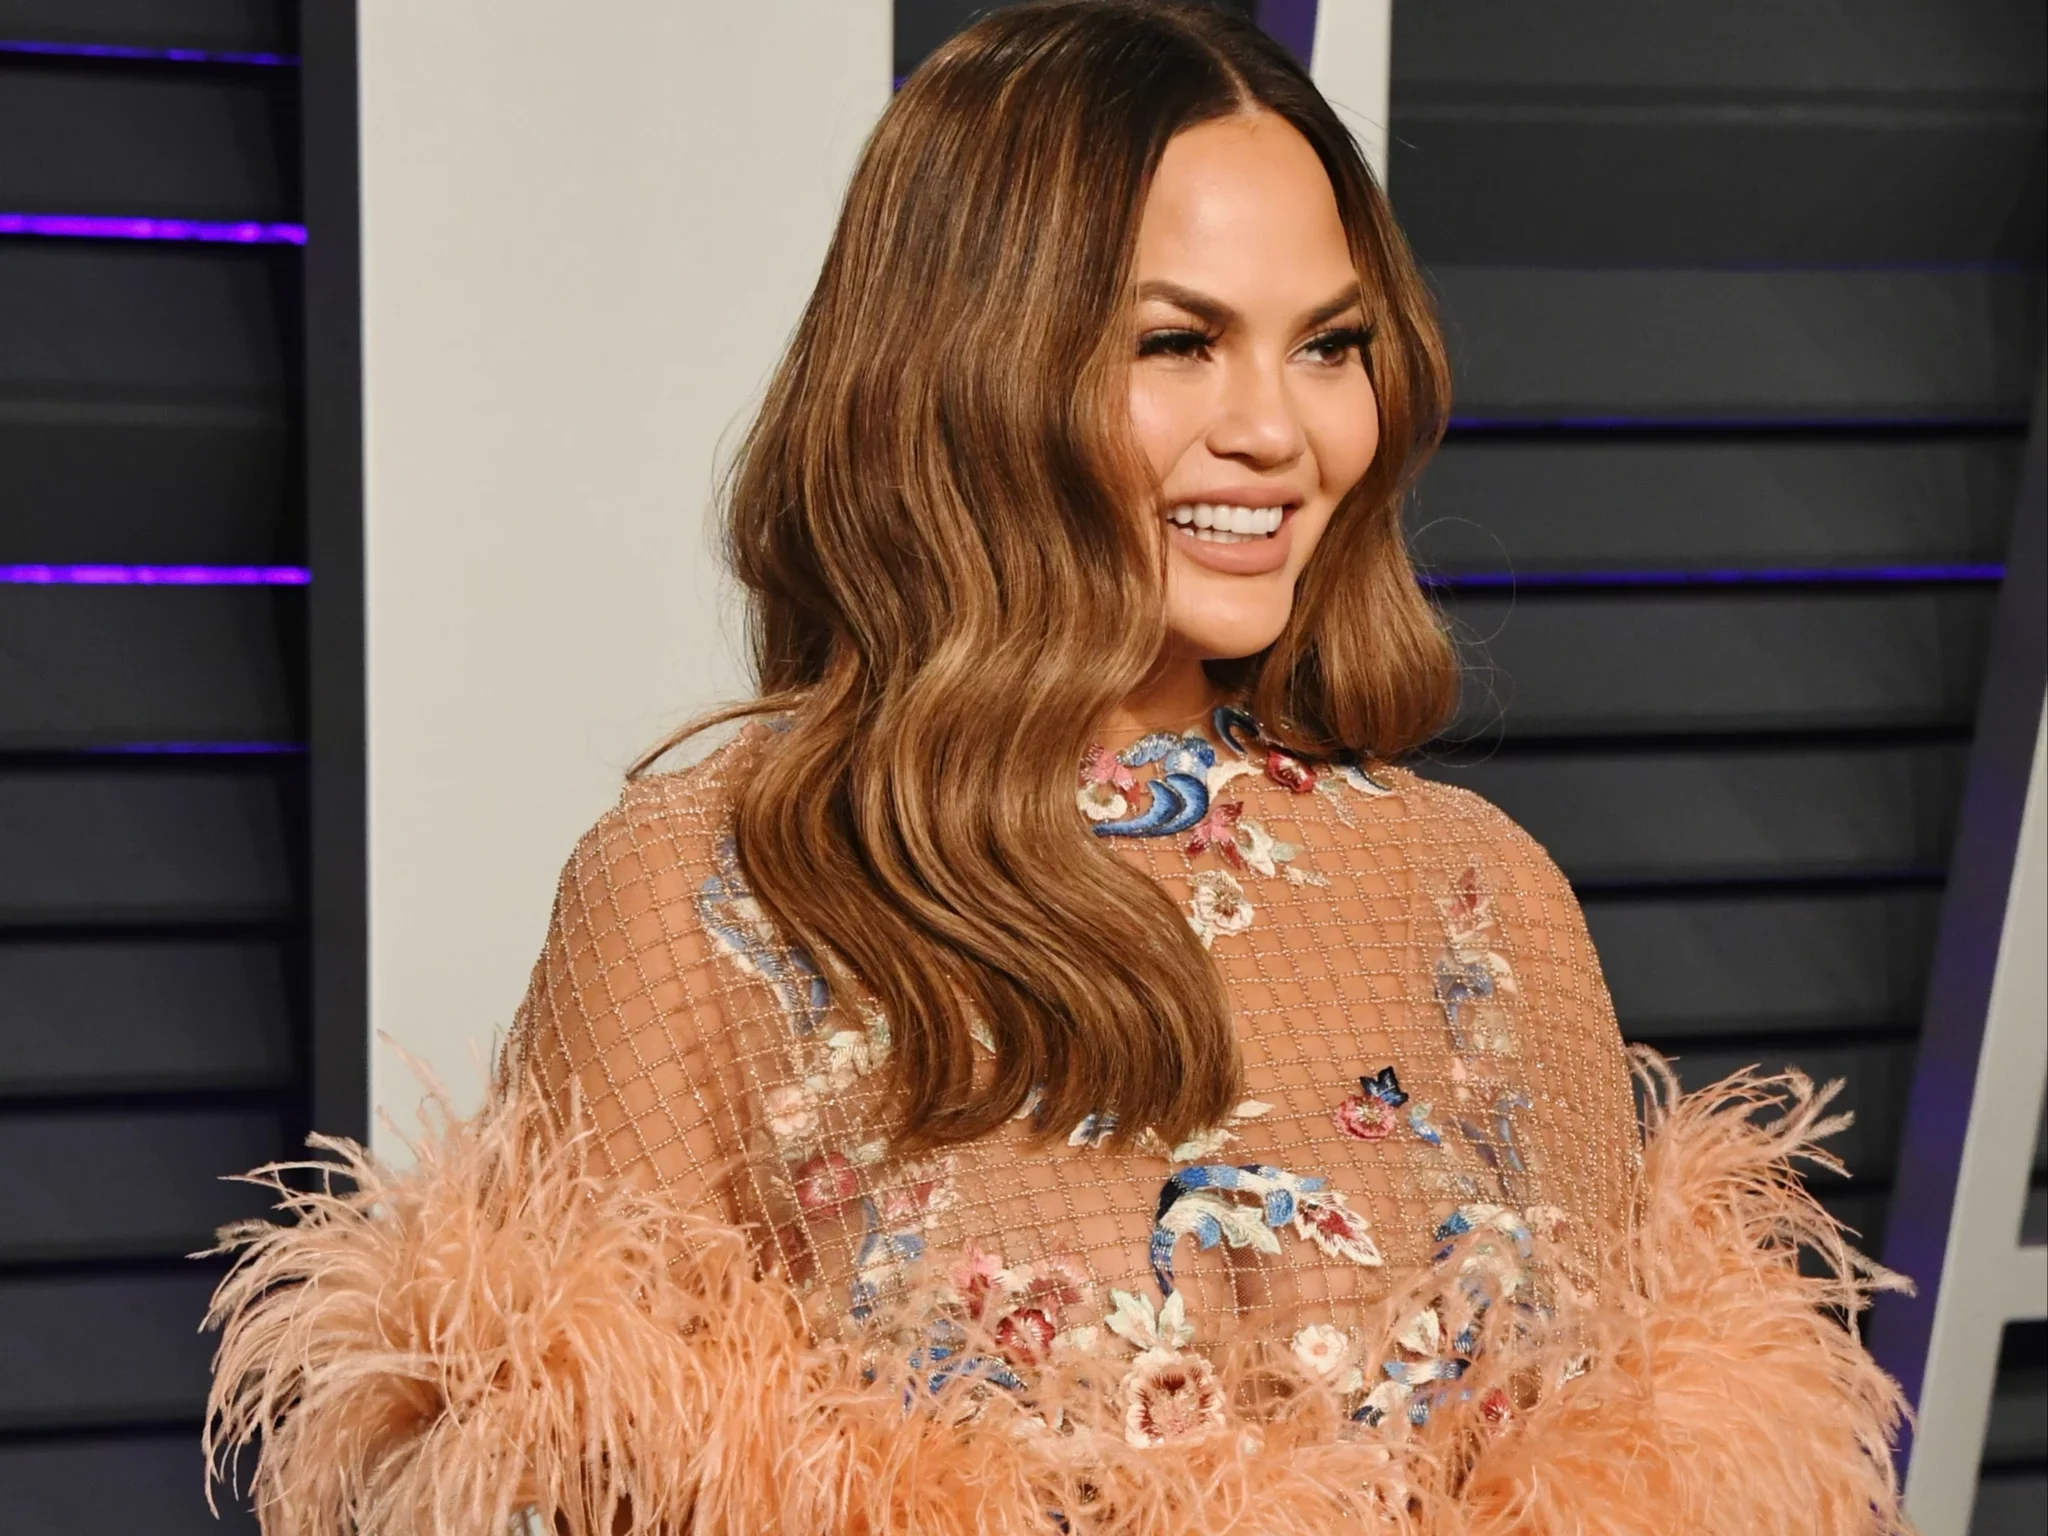 Chrissy Teigen Biography, Age, Height, Weight, Family, Husband, Net Worth, Education, Career & More